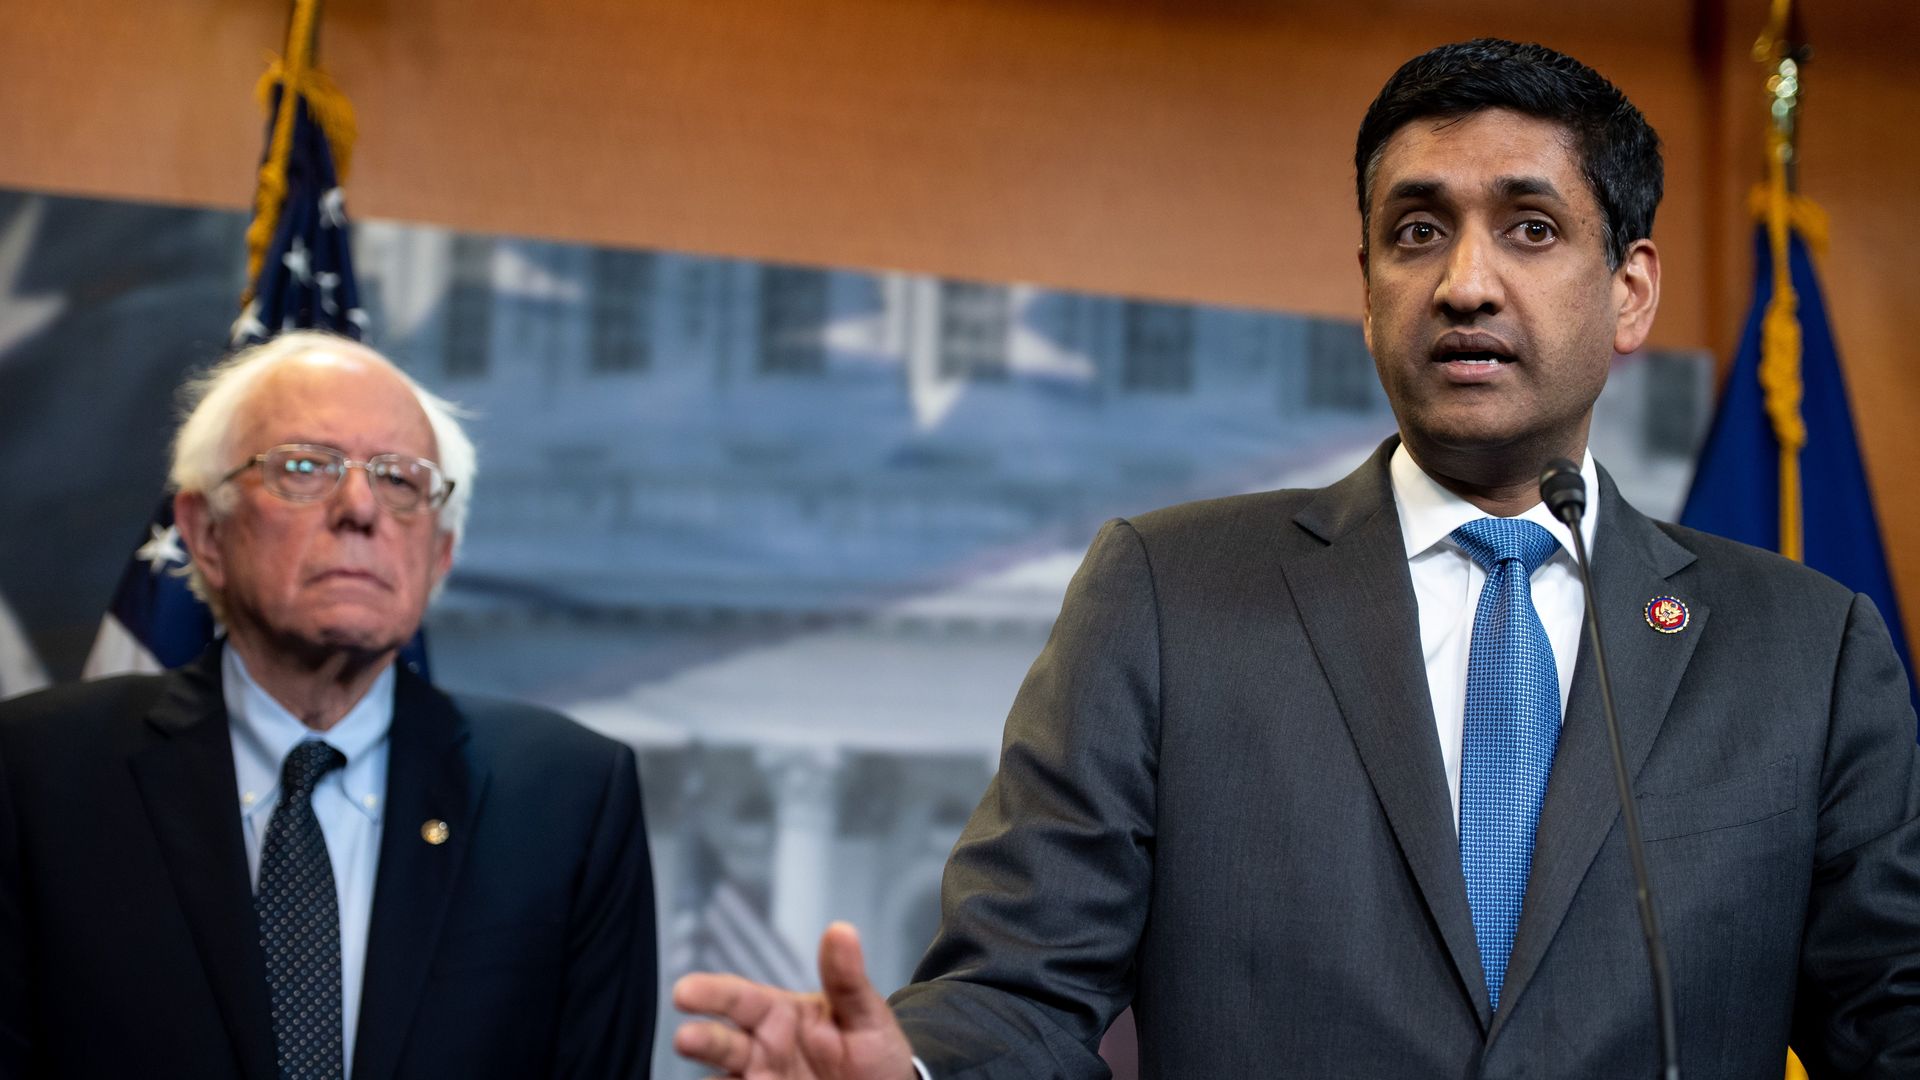 In this image, Sanders and Ro Khanna stand together at a podium